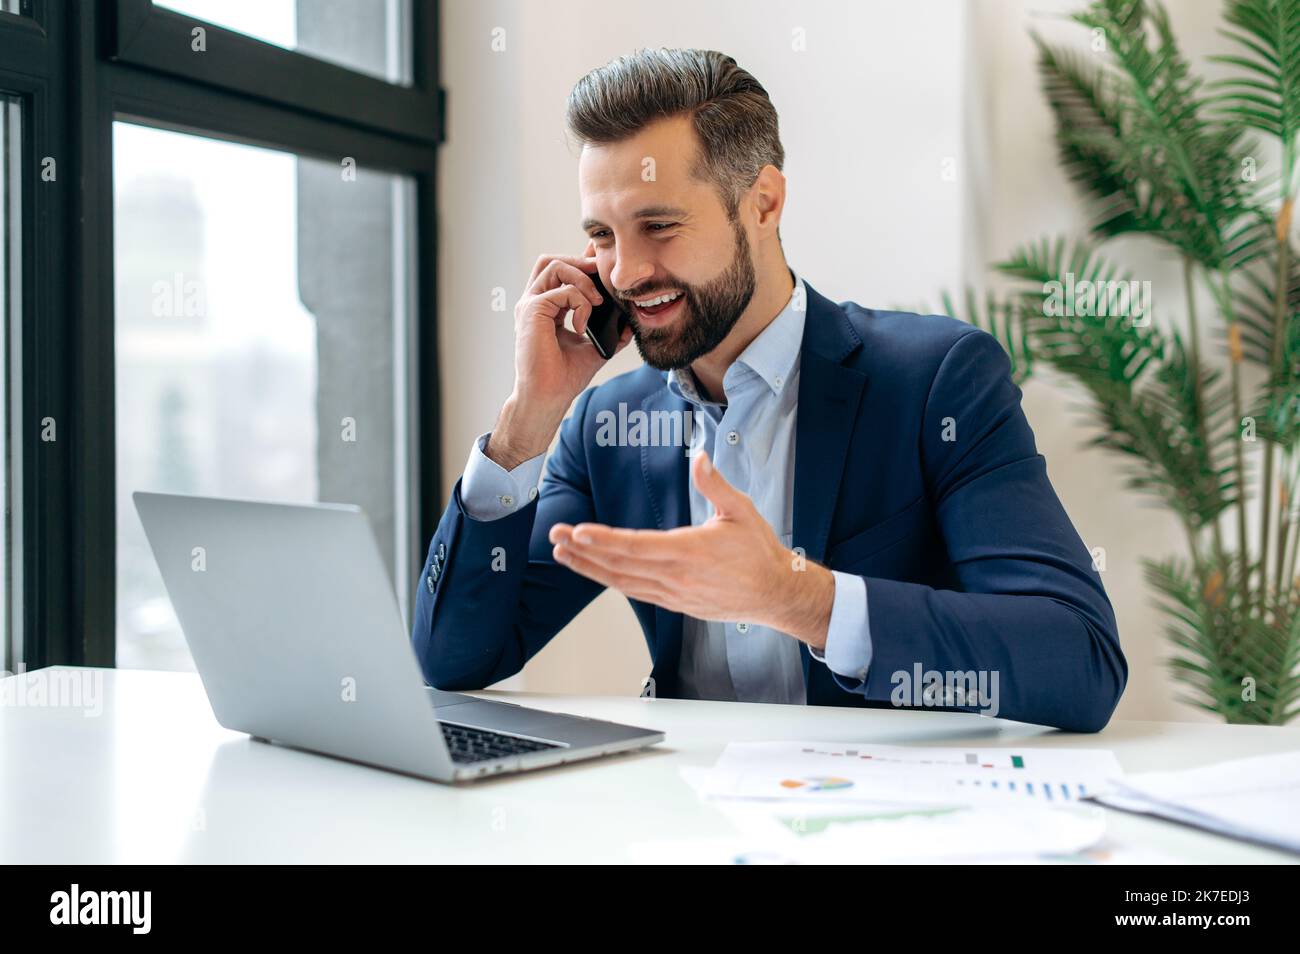 Happy successful busy caucasian man in a suit, company employee, top manager, boss, sitting in the office, talking on the phone with a colleague or client, resolves work issues, smiling Stock Photo